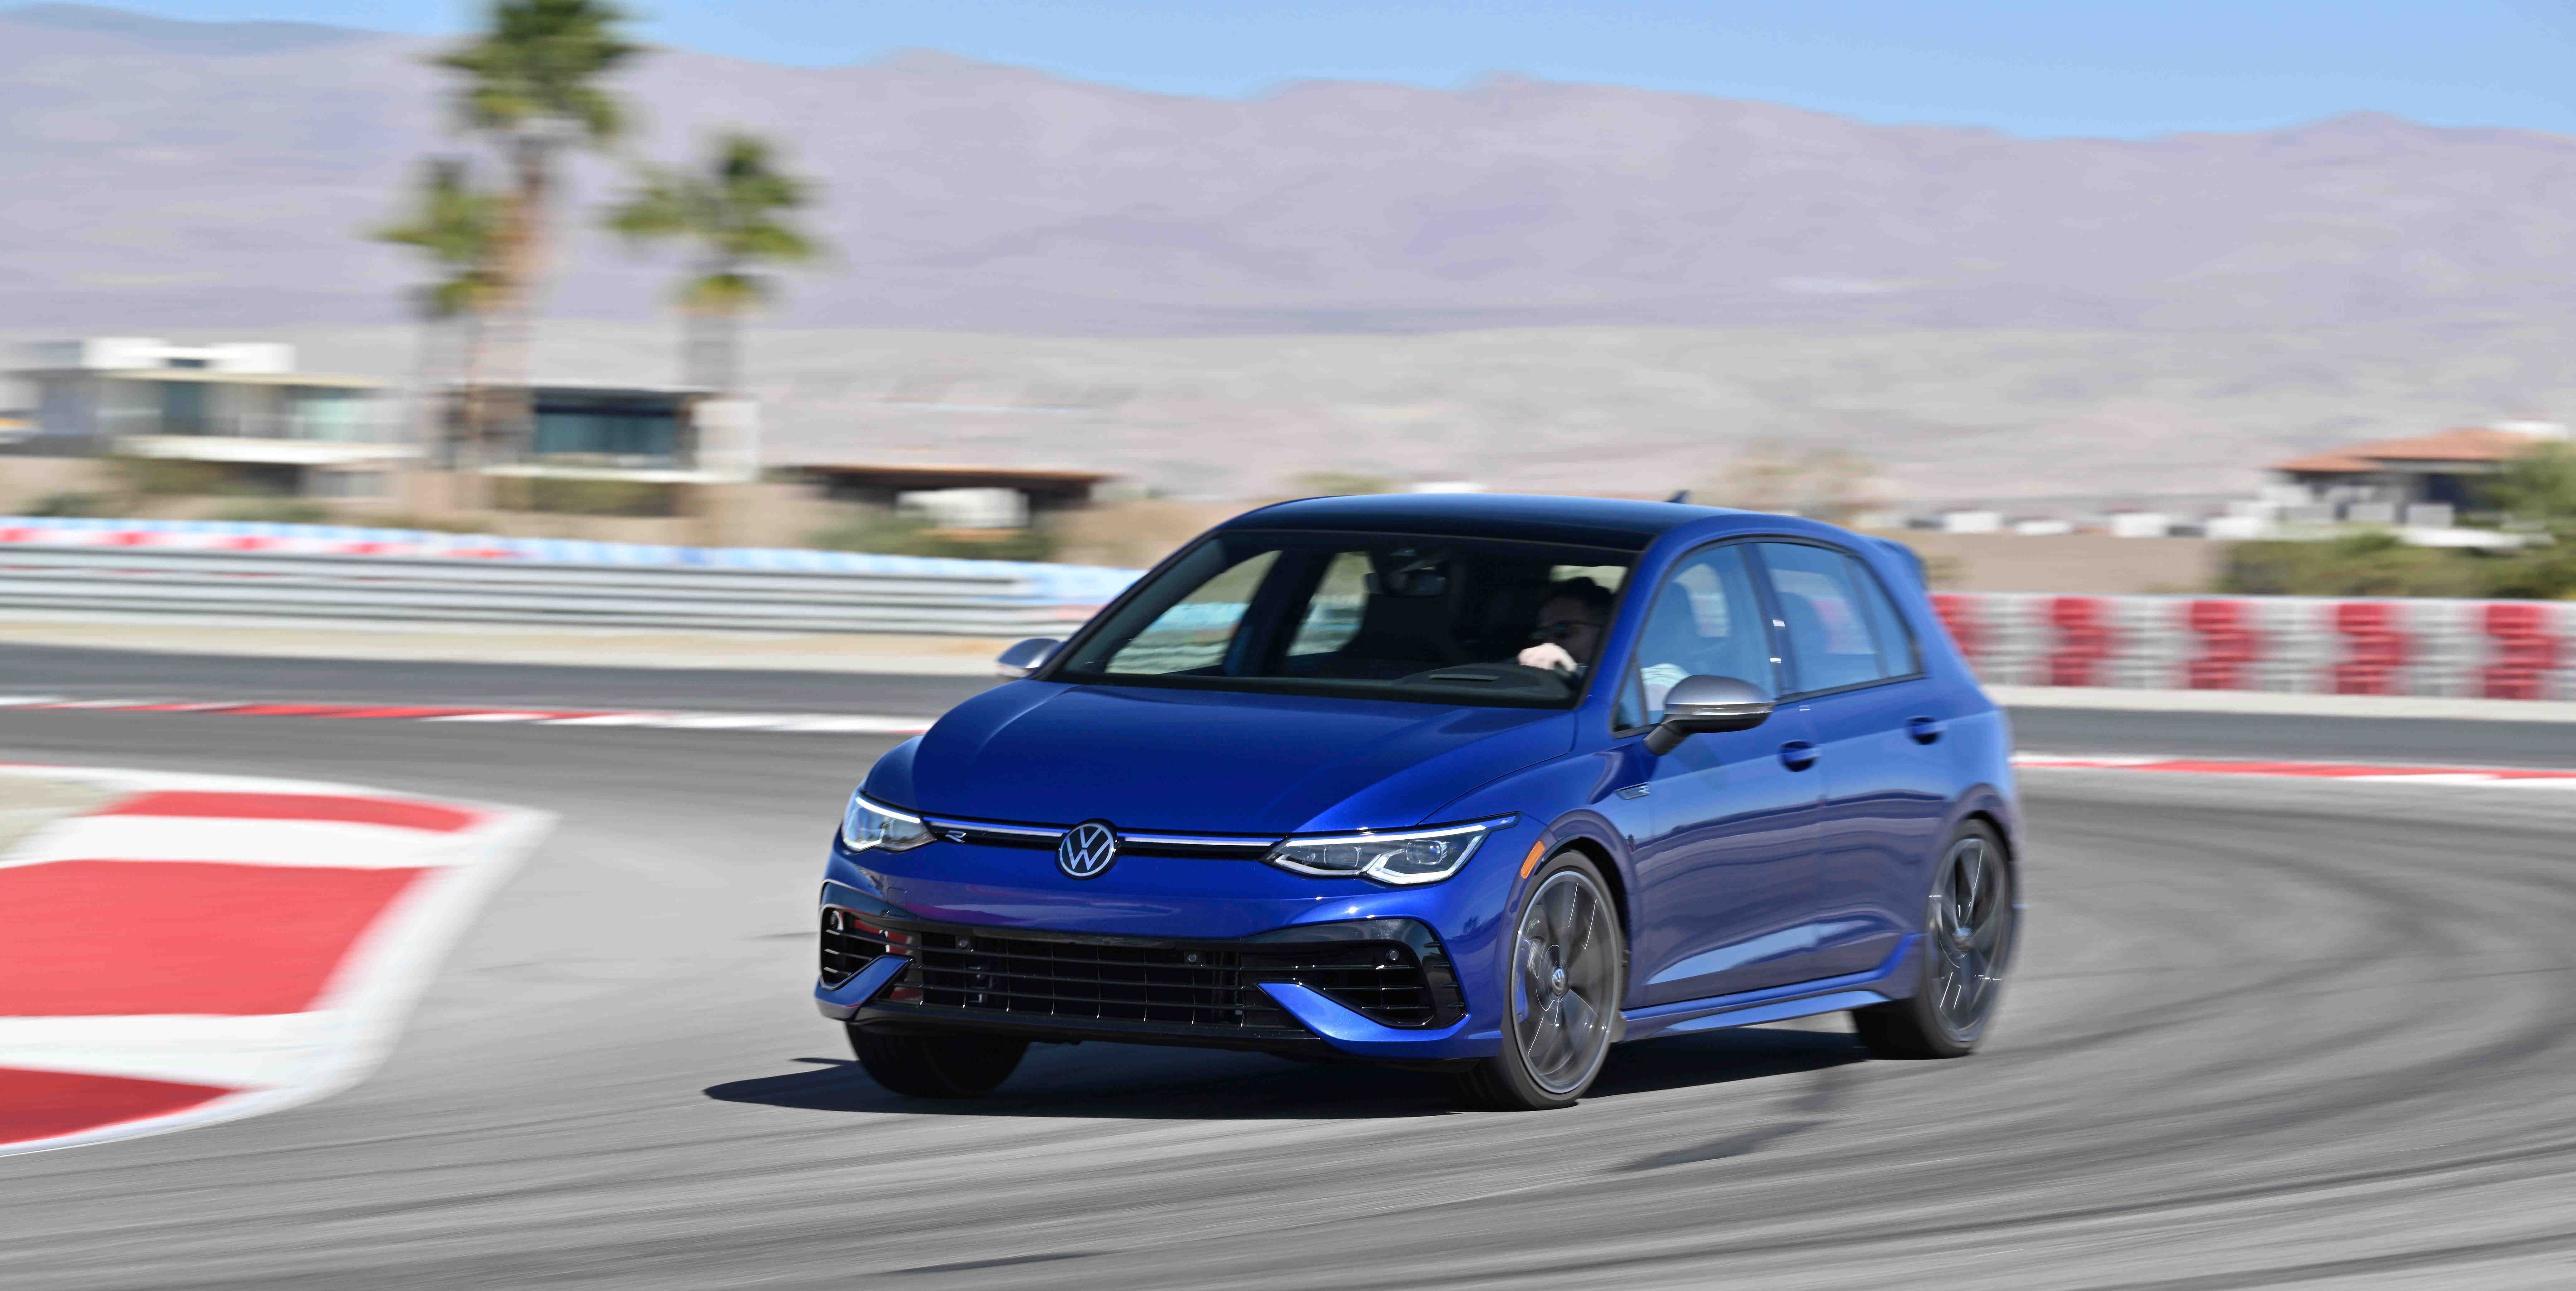 The 2022 Volkswagen Golf R Shows That Sophistication Isn't Always a Good Thing